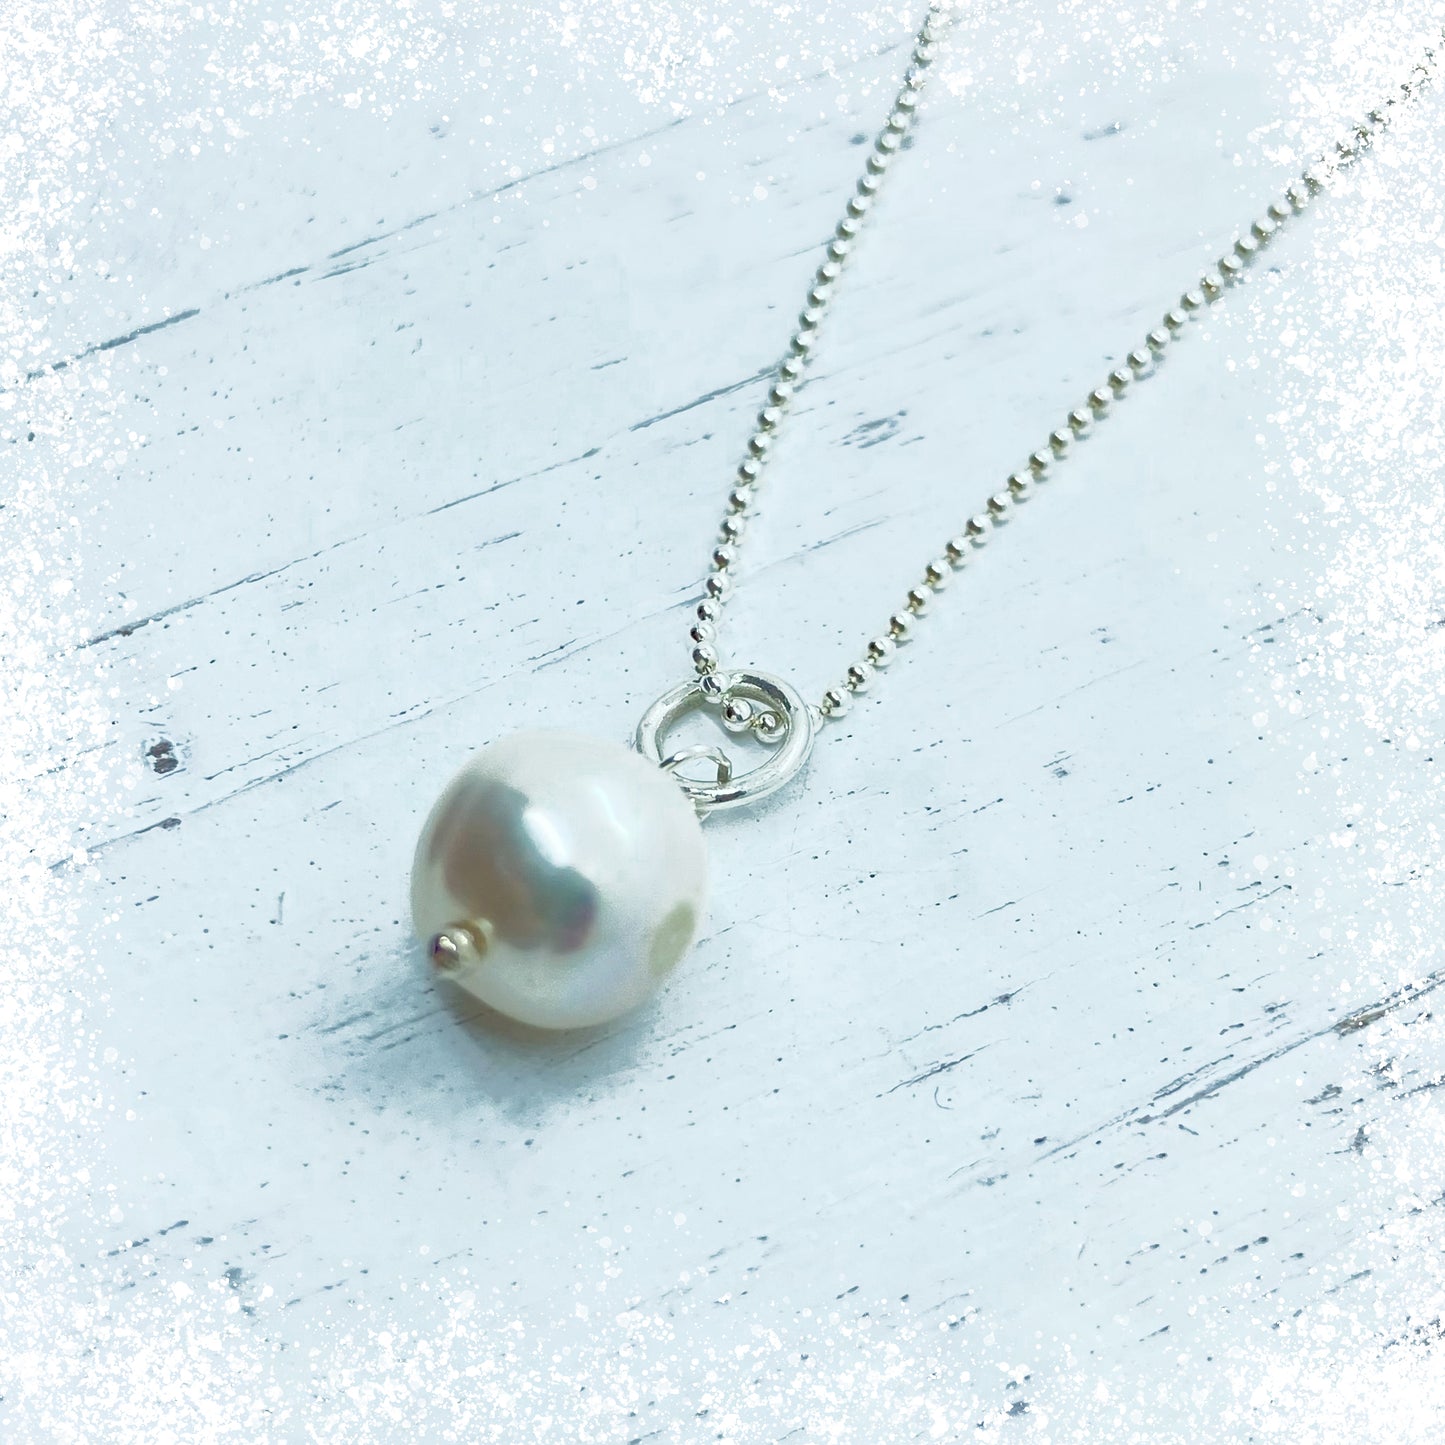 Freshwater pearl pendant with ball chain / 925 sterling silver